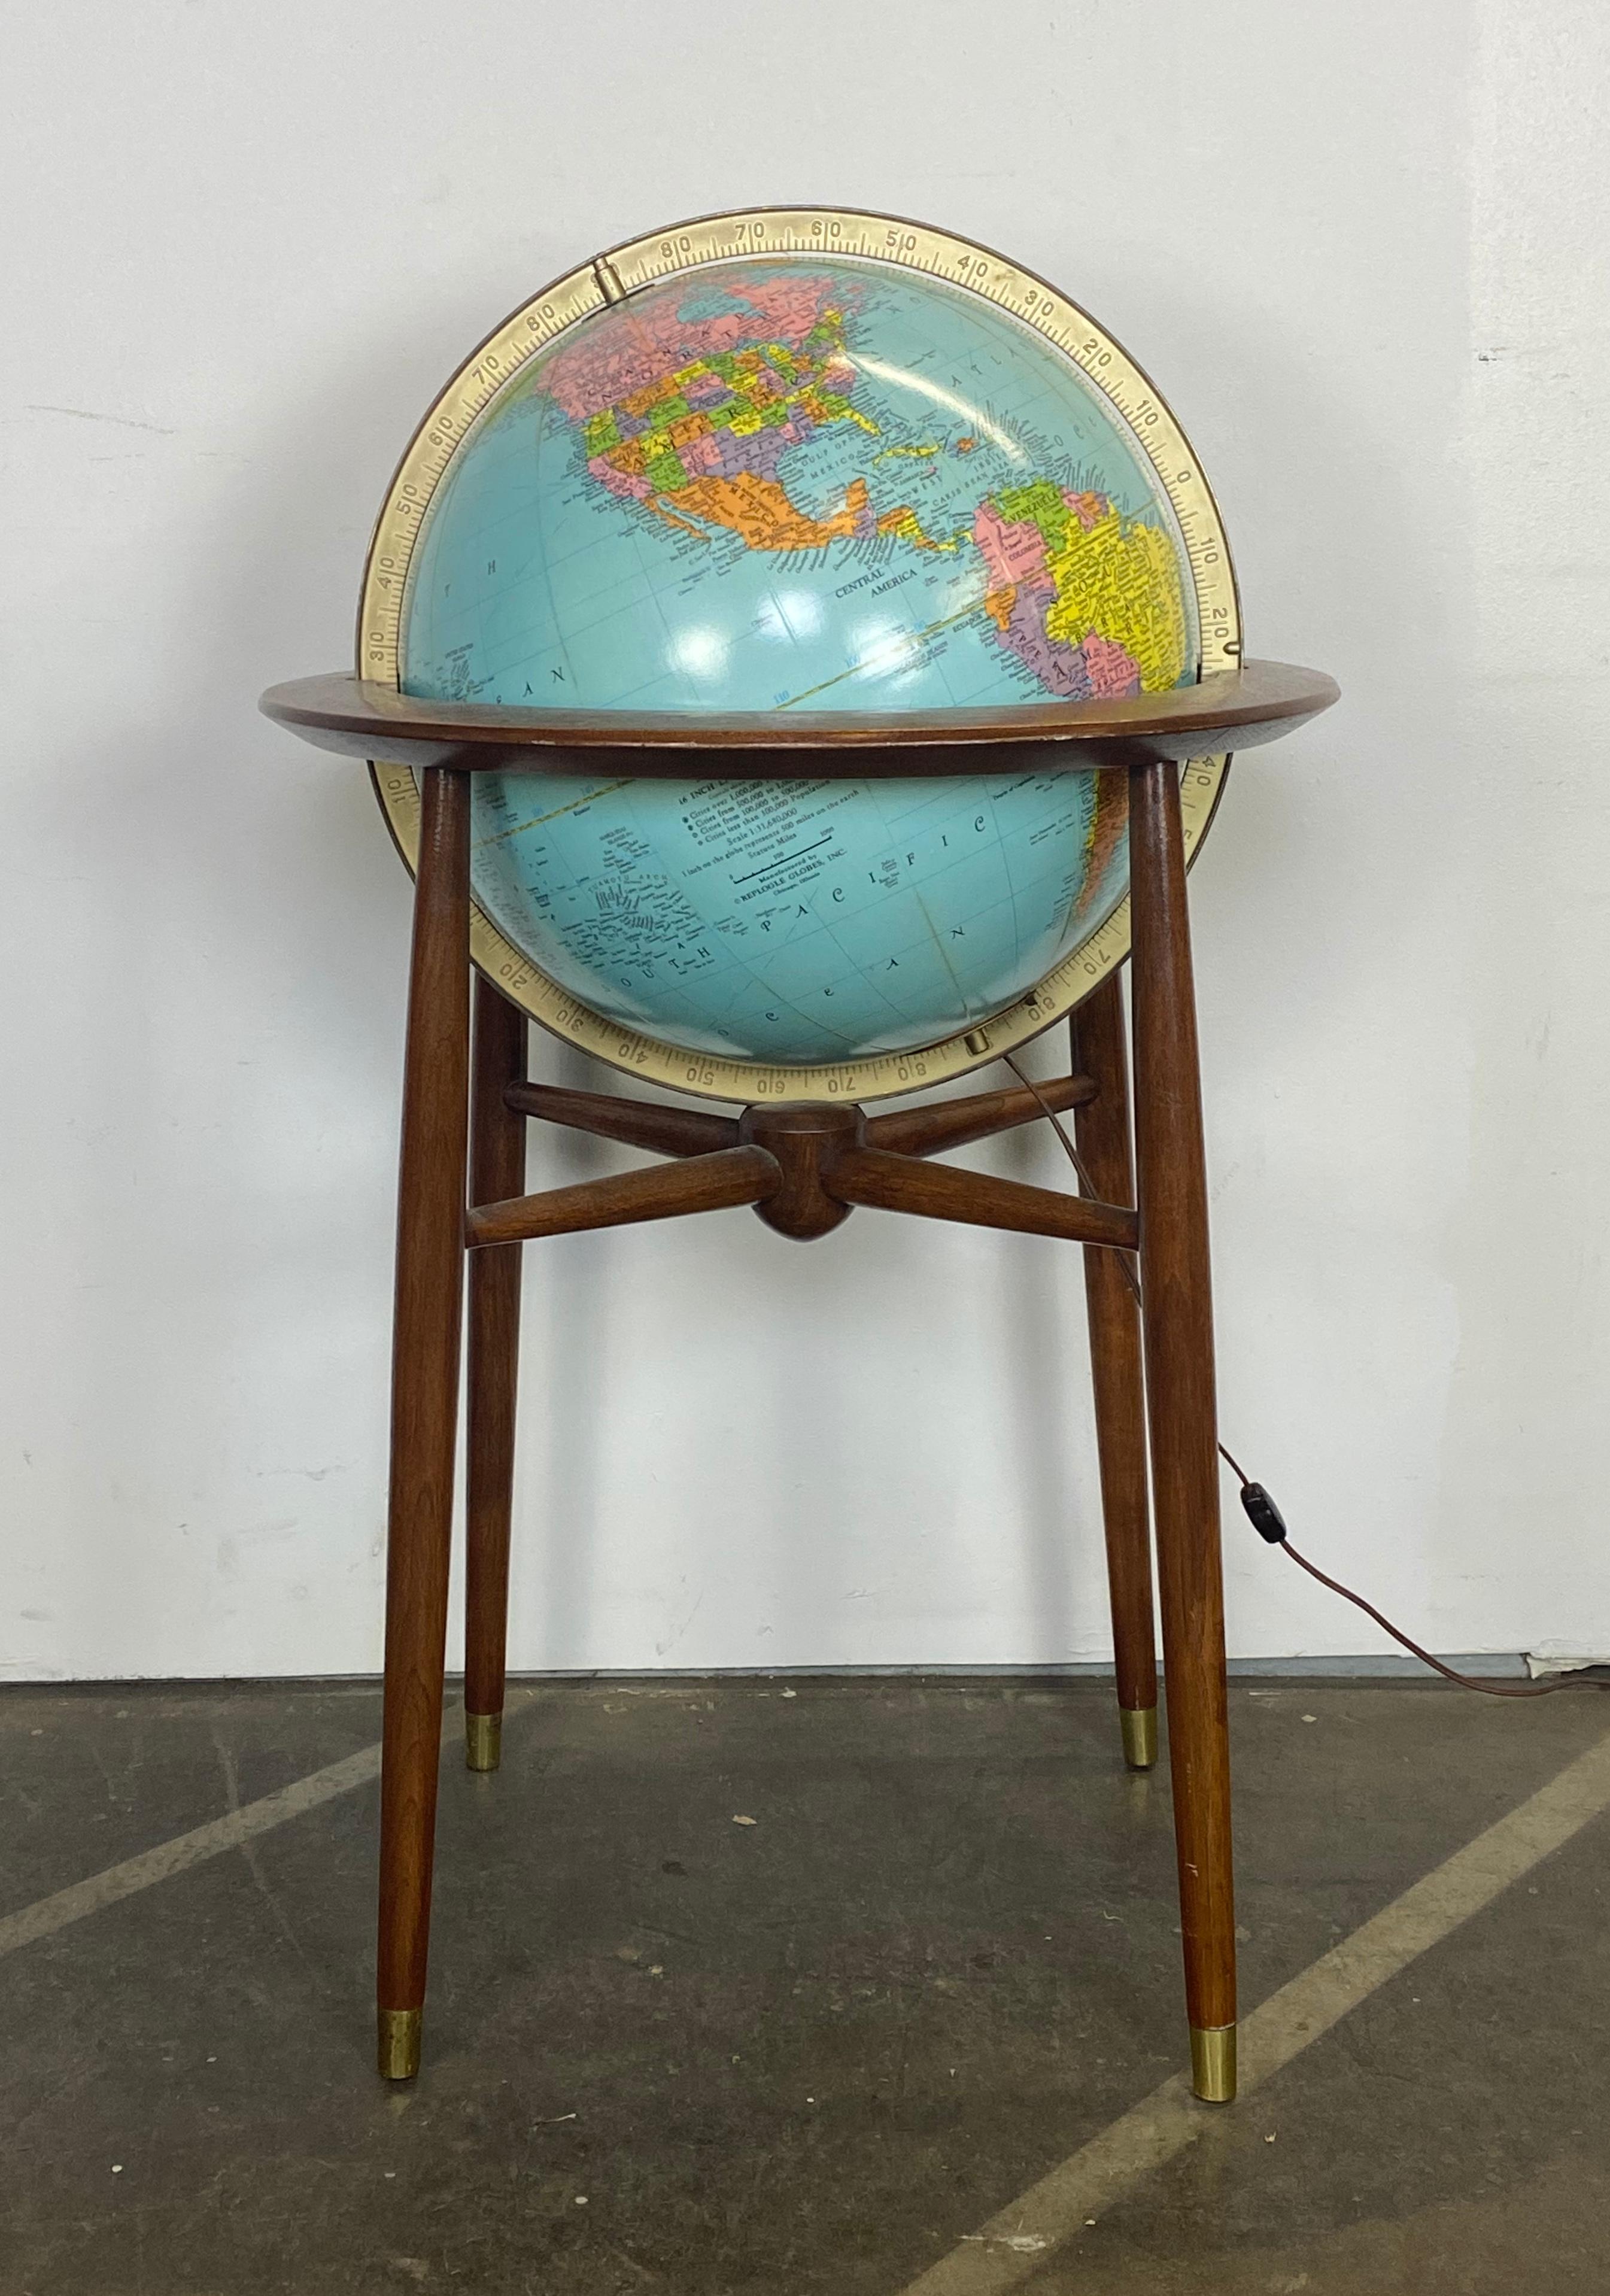 Amazing classic 1960s globe. Made by Replogle featuring bright and distinct colors. With illuminated feature and accommodates modern bulbs. Tested and working. Walnut frame in good condition with sculpted simple yet elegant form, including brass